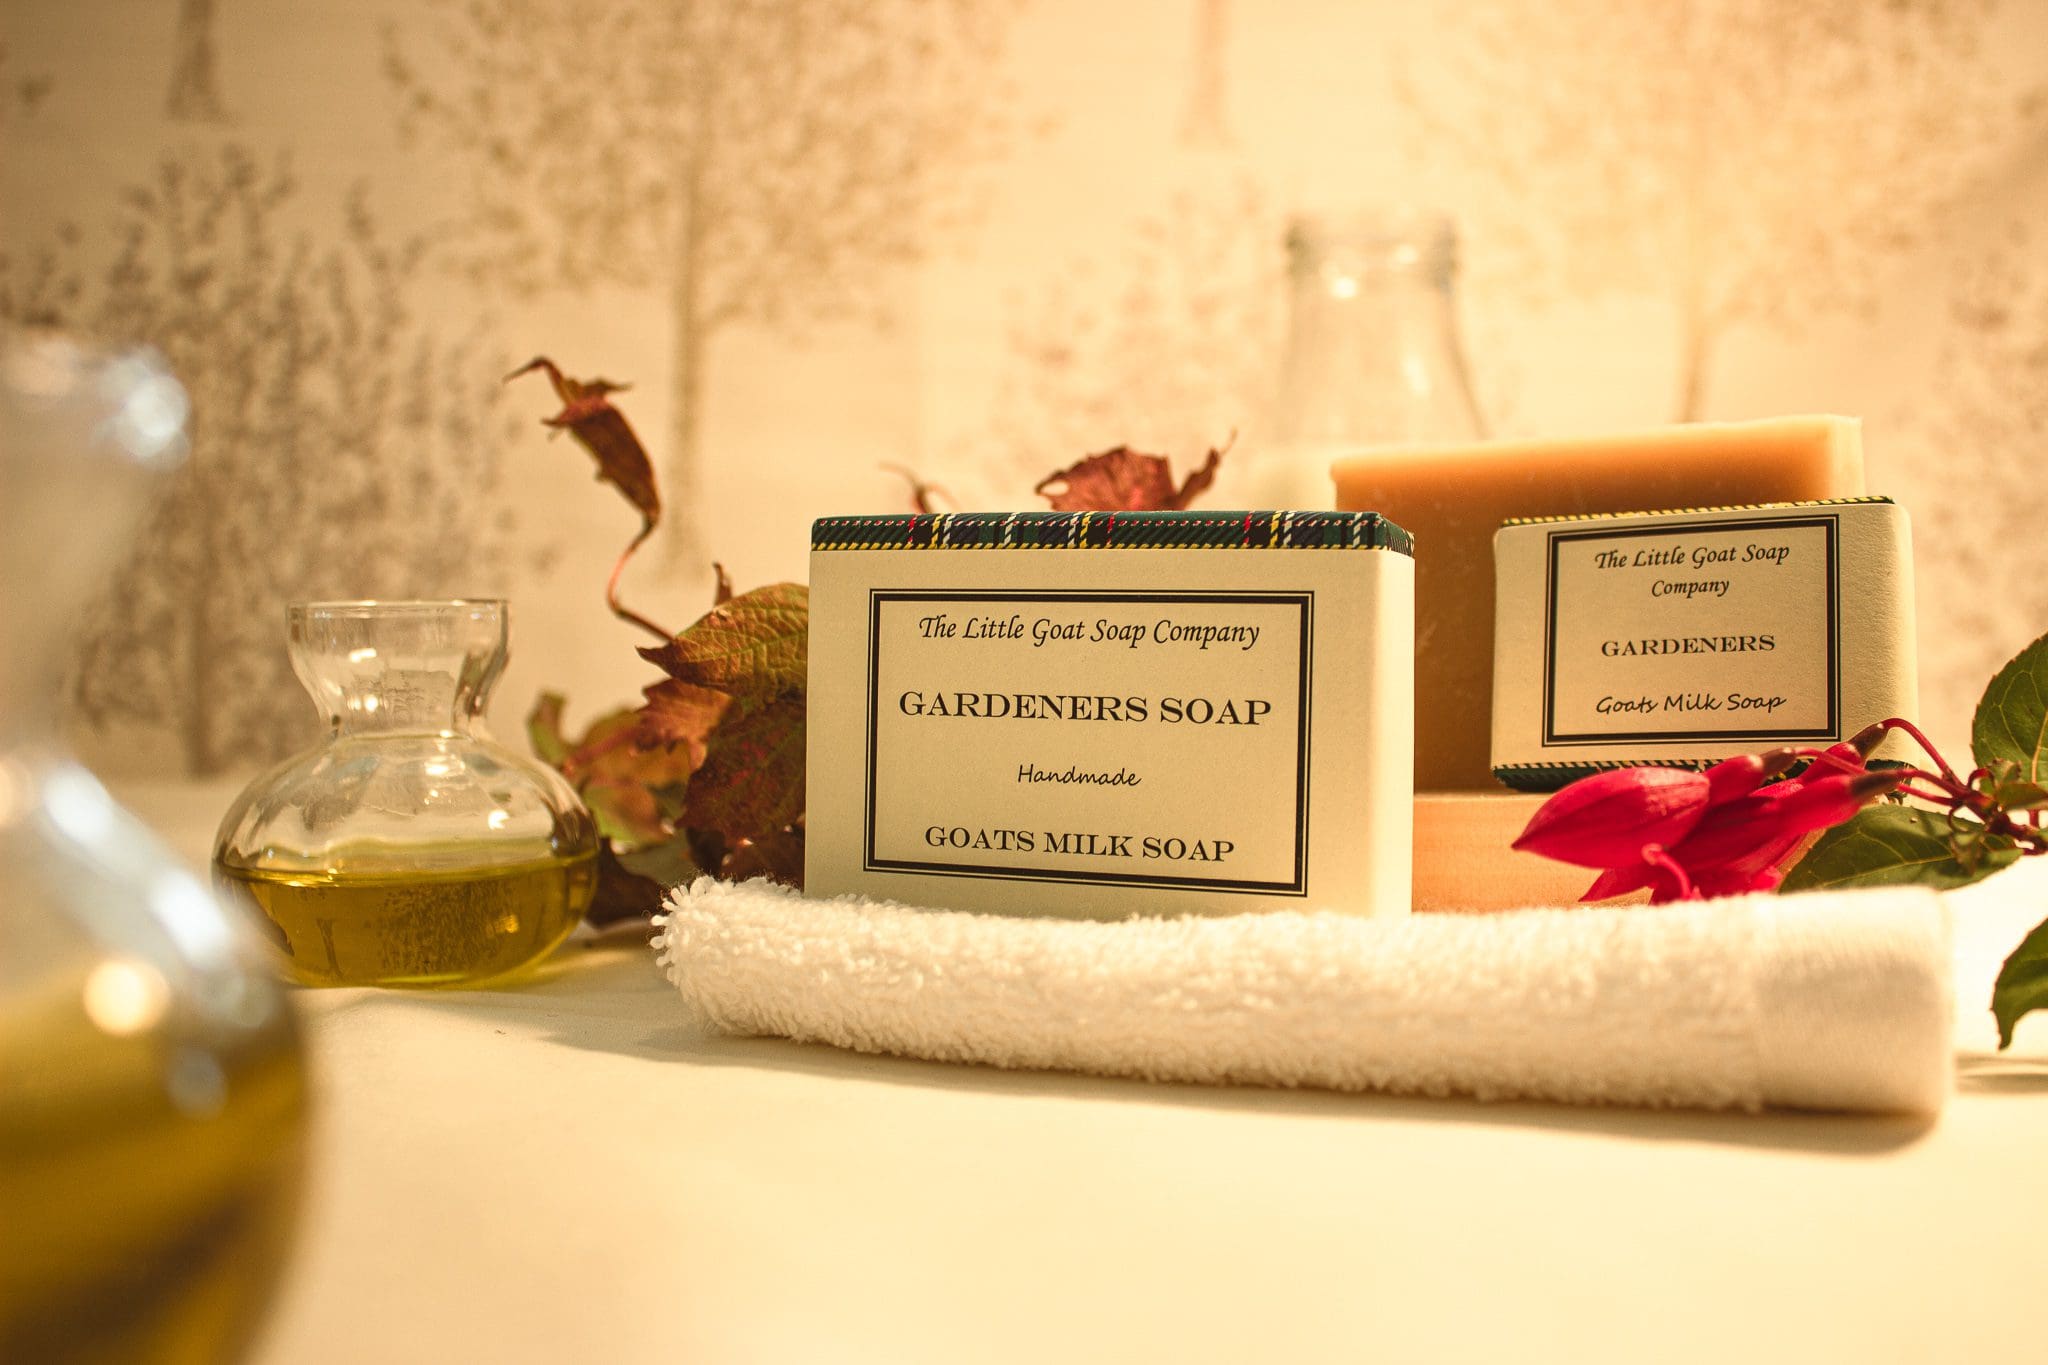 soap products from the little goat soap company showing their gardeners soap, the photo uses depth of field with items such as jars of oils, and autumnal leaves